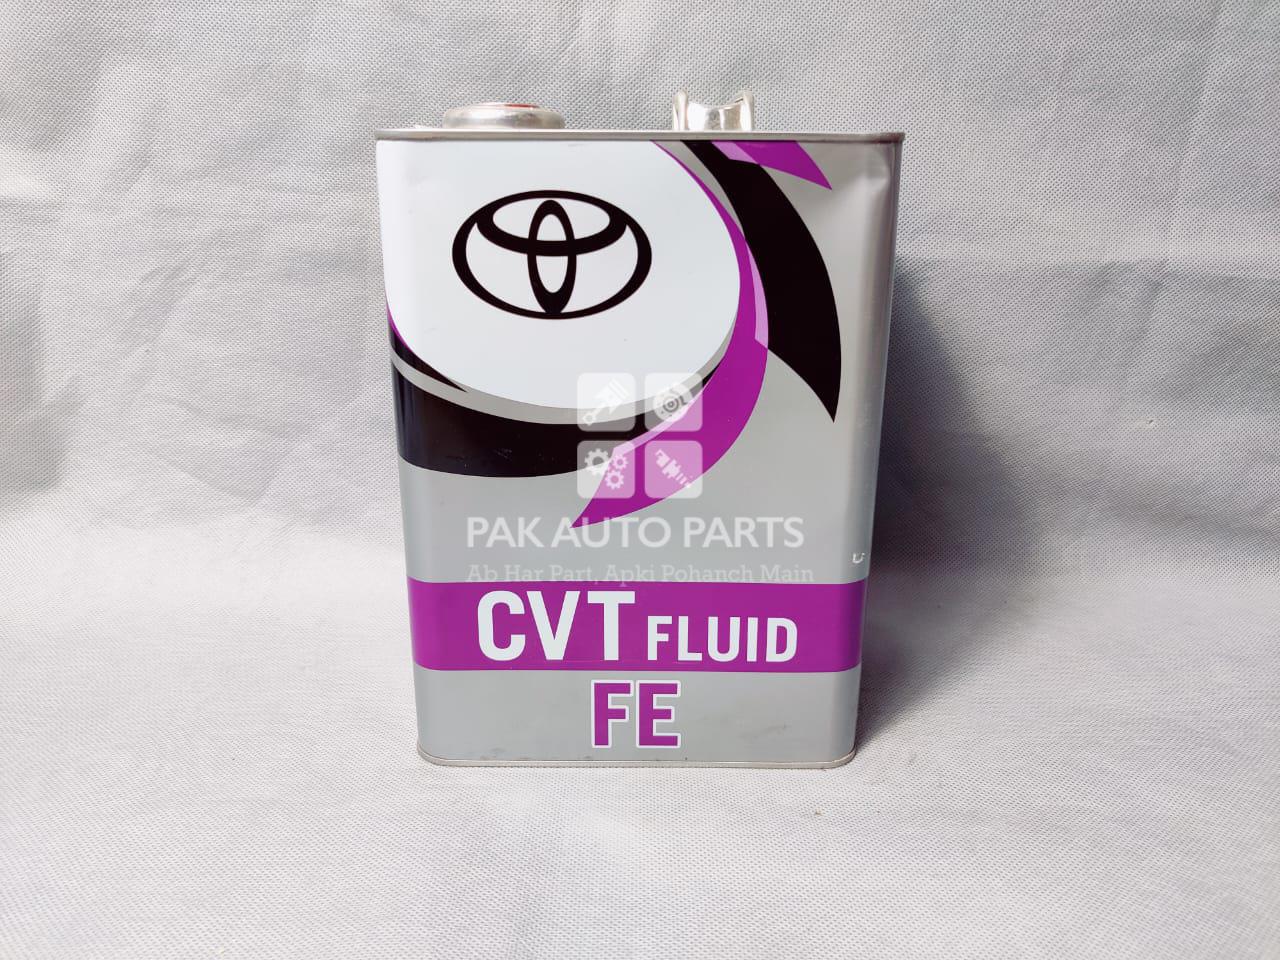 Picture of Toyota CVT Fluid FE